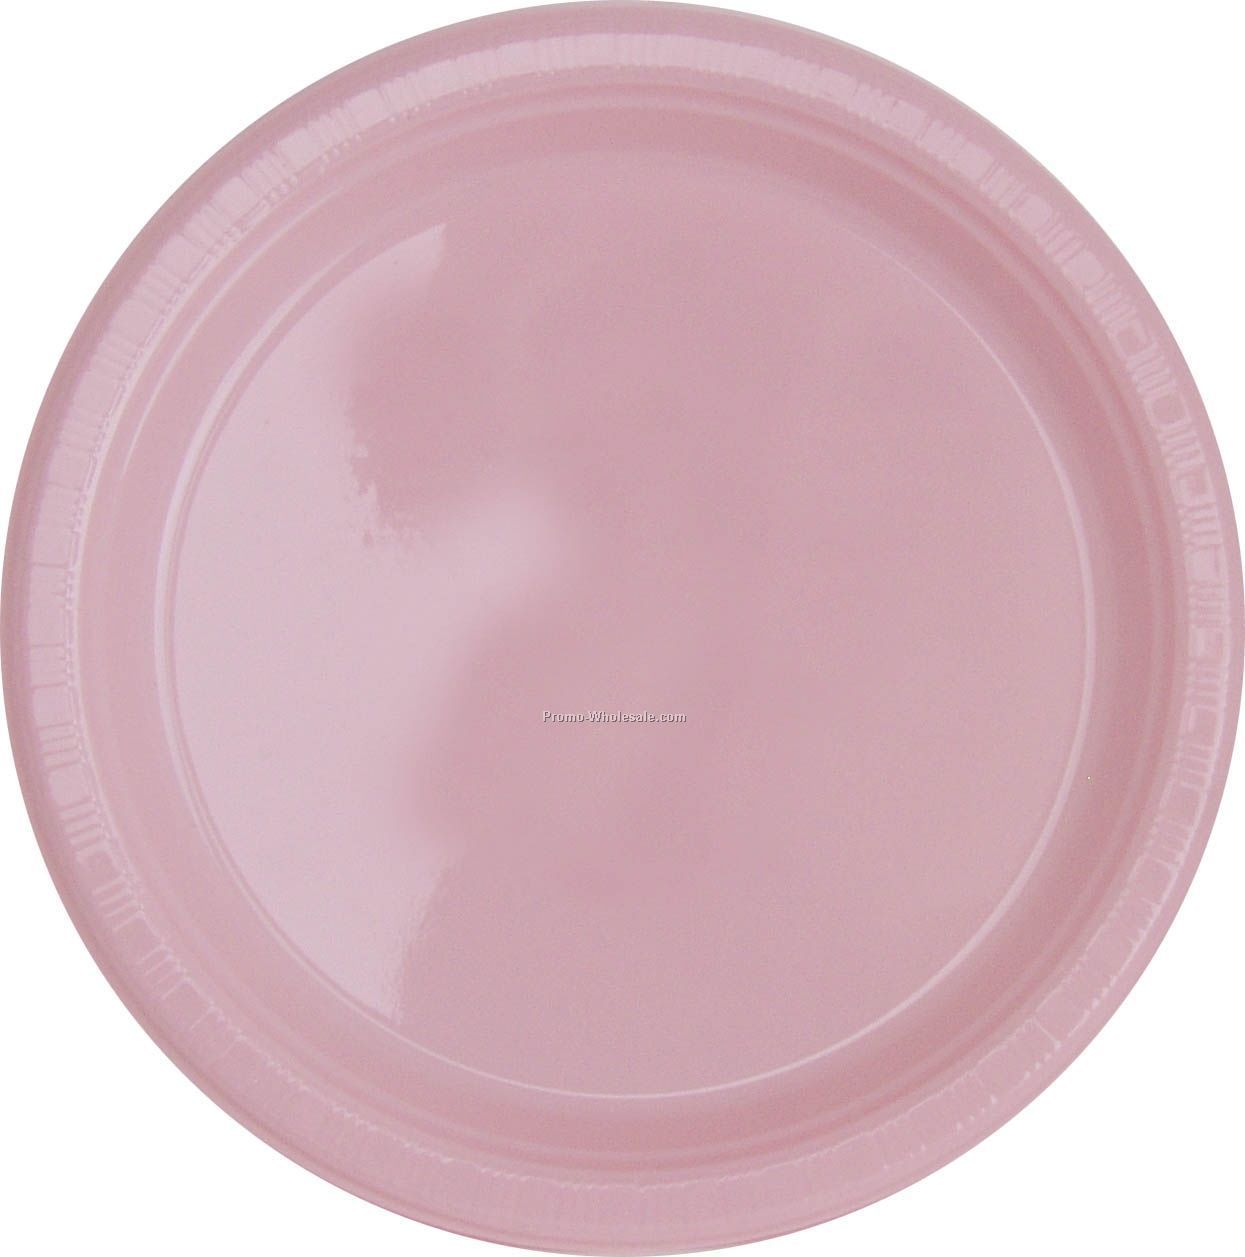 Colorware 7" Classic Pink Plate